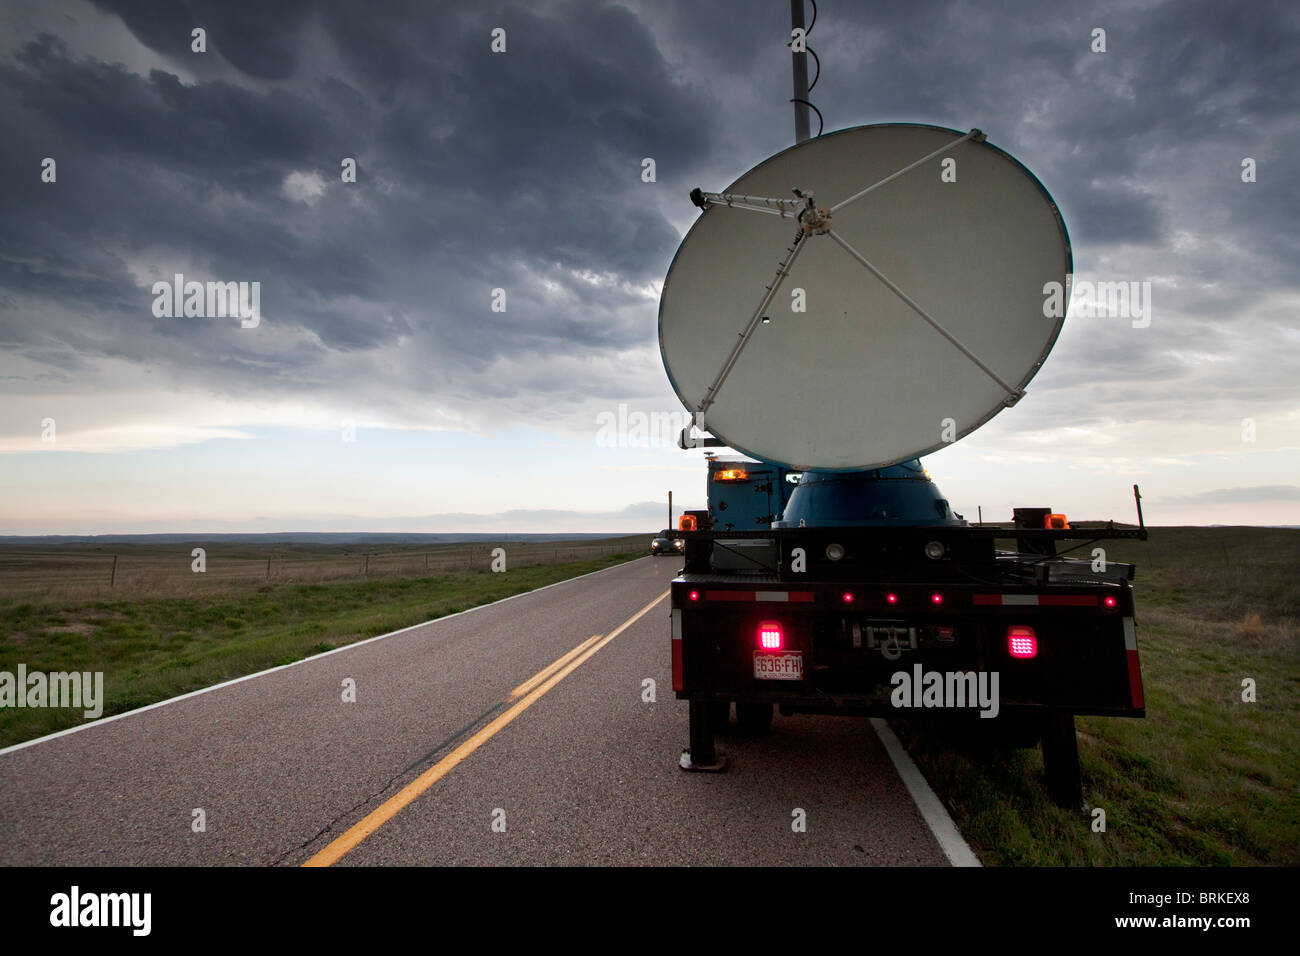 A Doppler on Wheels truck scans a supercellular thunderstorm in rural Wyoming, May 21, 2010. Stock Photo